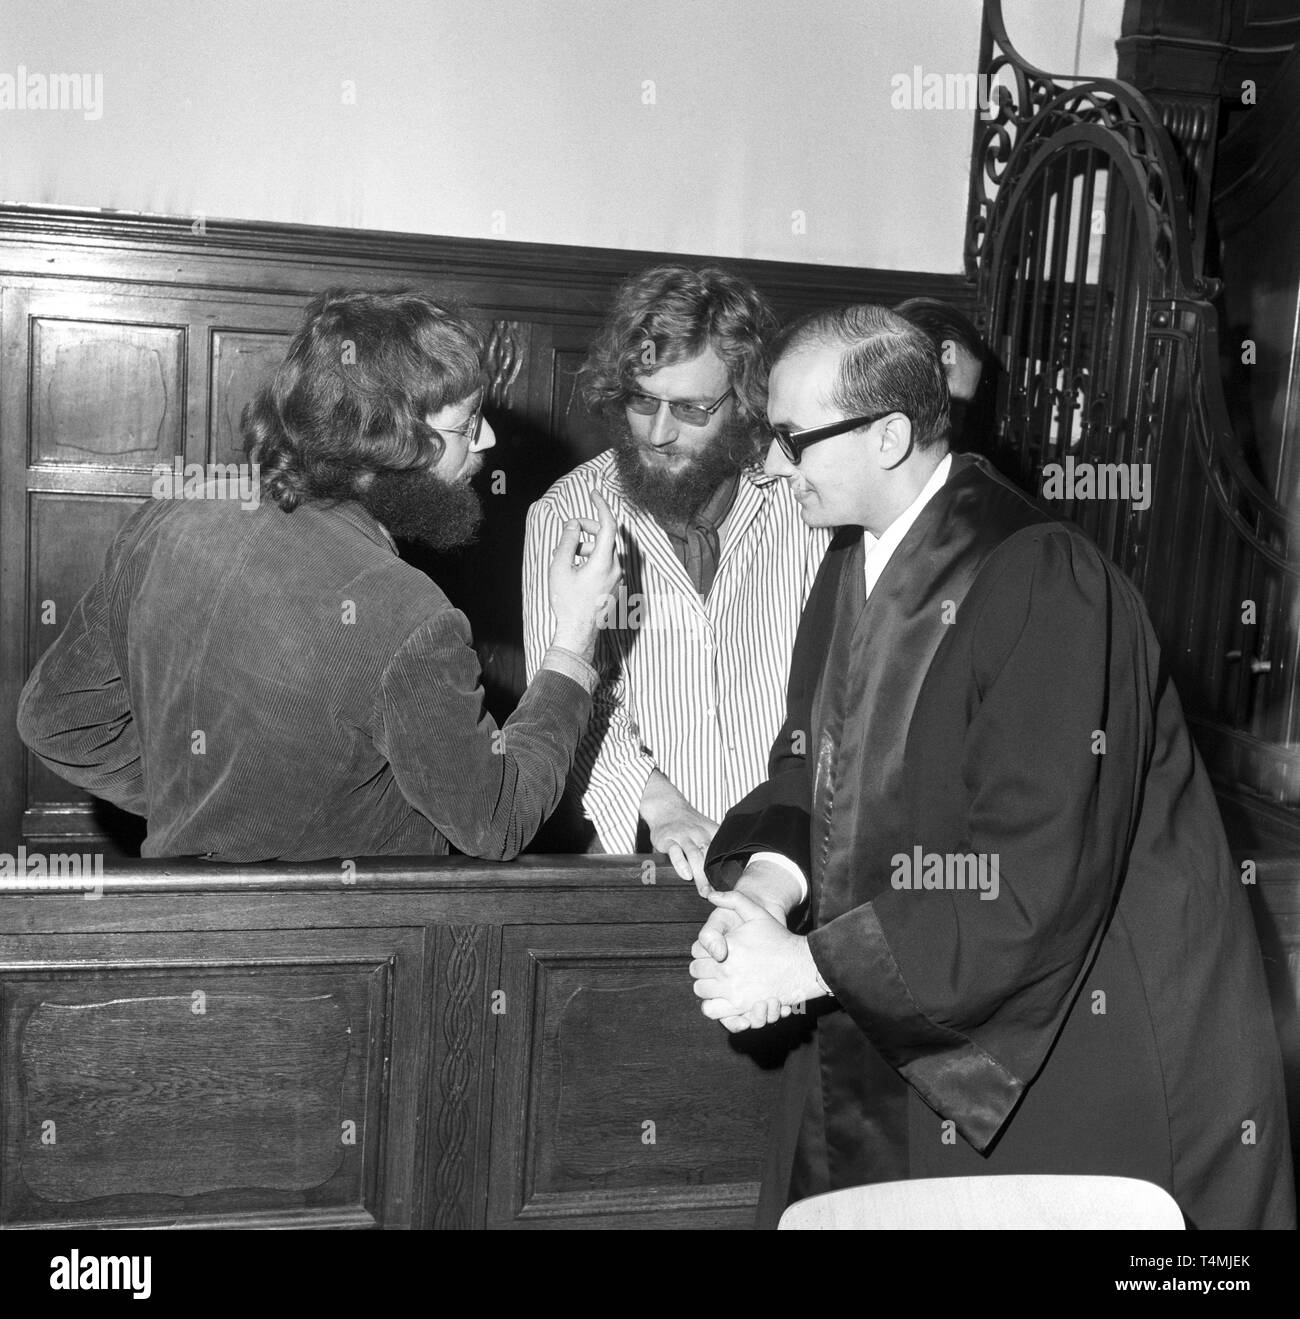 The defendants Fritz Teufel and Jörg Schlotter (l-r) and lawyer Horst Mahler. The process because of trespass against Teufel and Schlotterer, who had not appeared to an earlier date and and therefore had been arrested, started on 03 October 1968 in Berlin. Teufel stated - ironically - that he regretted his transgressions deeply and wanted to be punished with three to five years of prison. His fellow defendent Schlotterer was a 'disgusting anarchist' and his lawyer Mahler should be put into prison. | usage worldwide Stock Photo